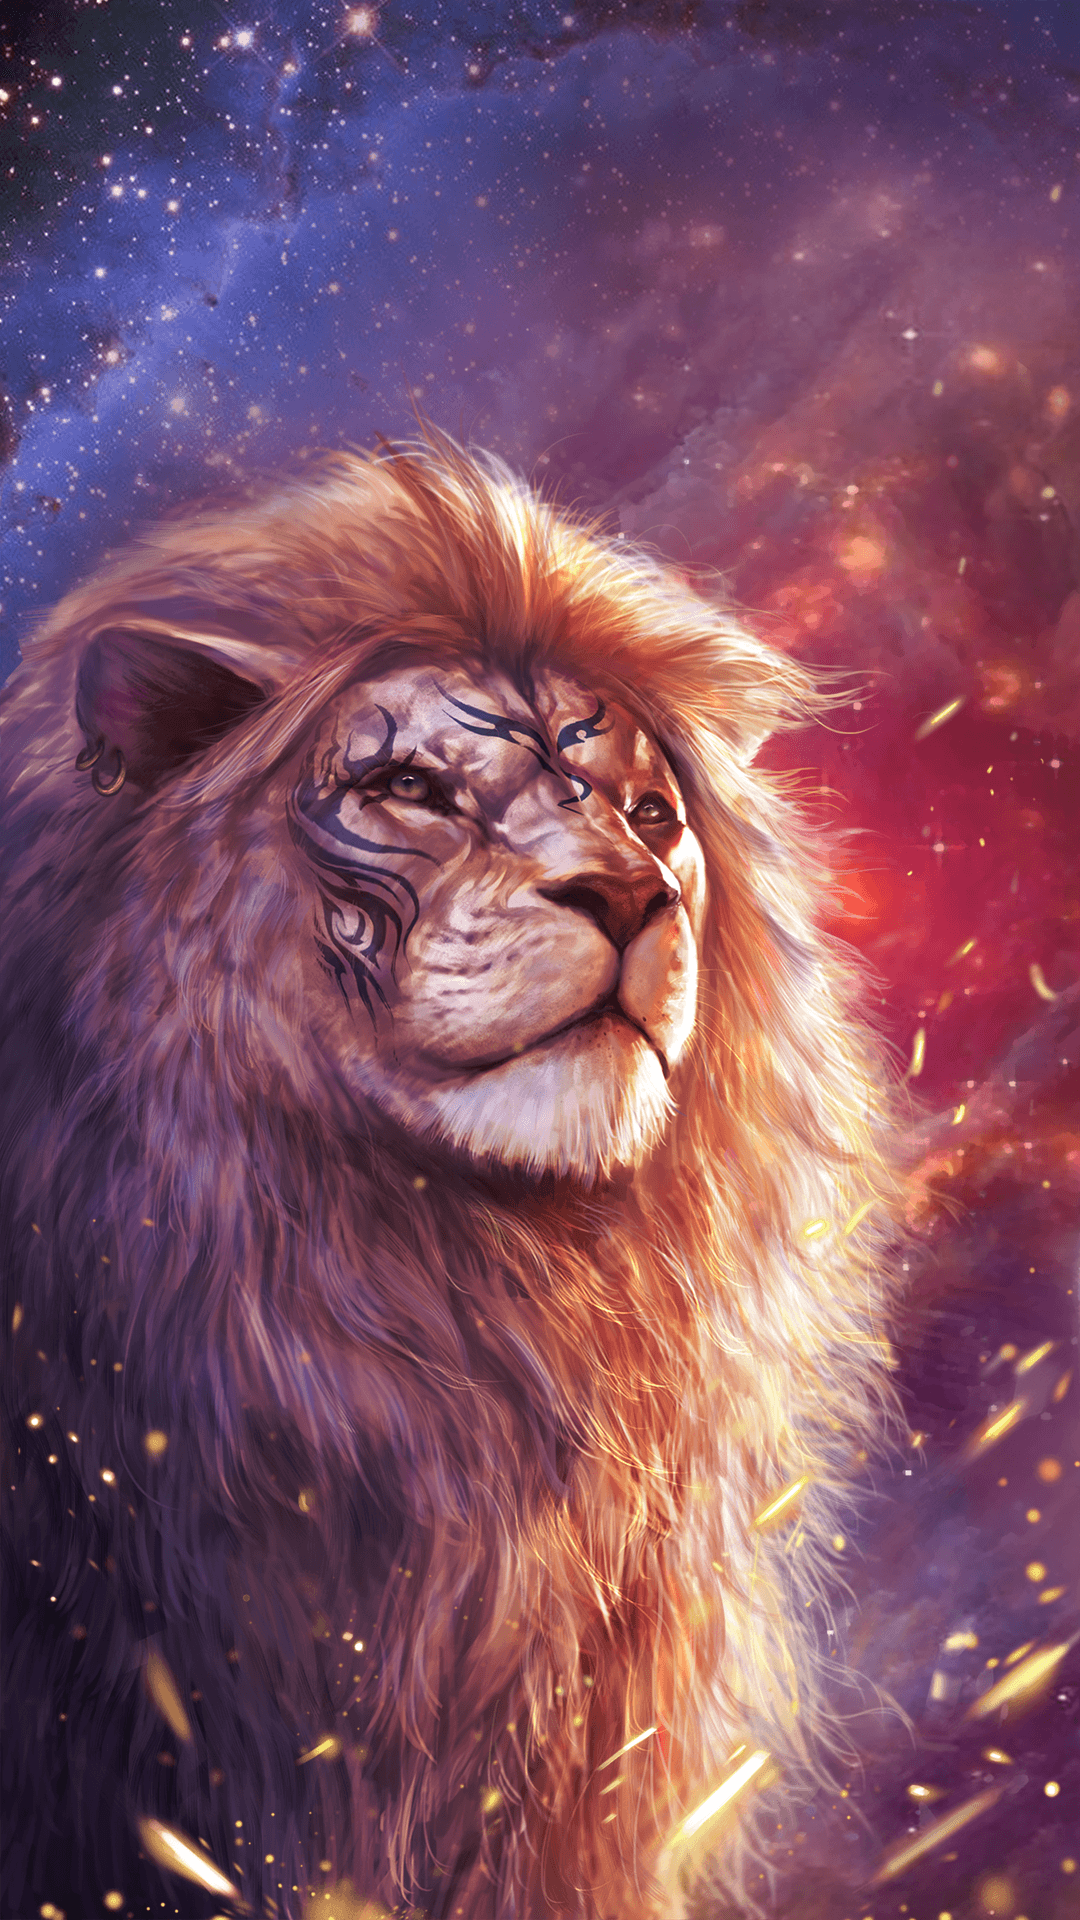 Download Cool lion wallpaper with totem tattoo Animal